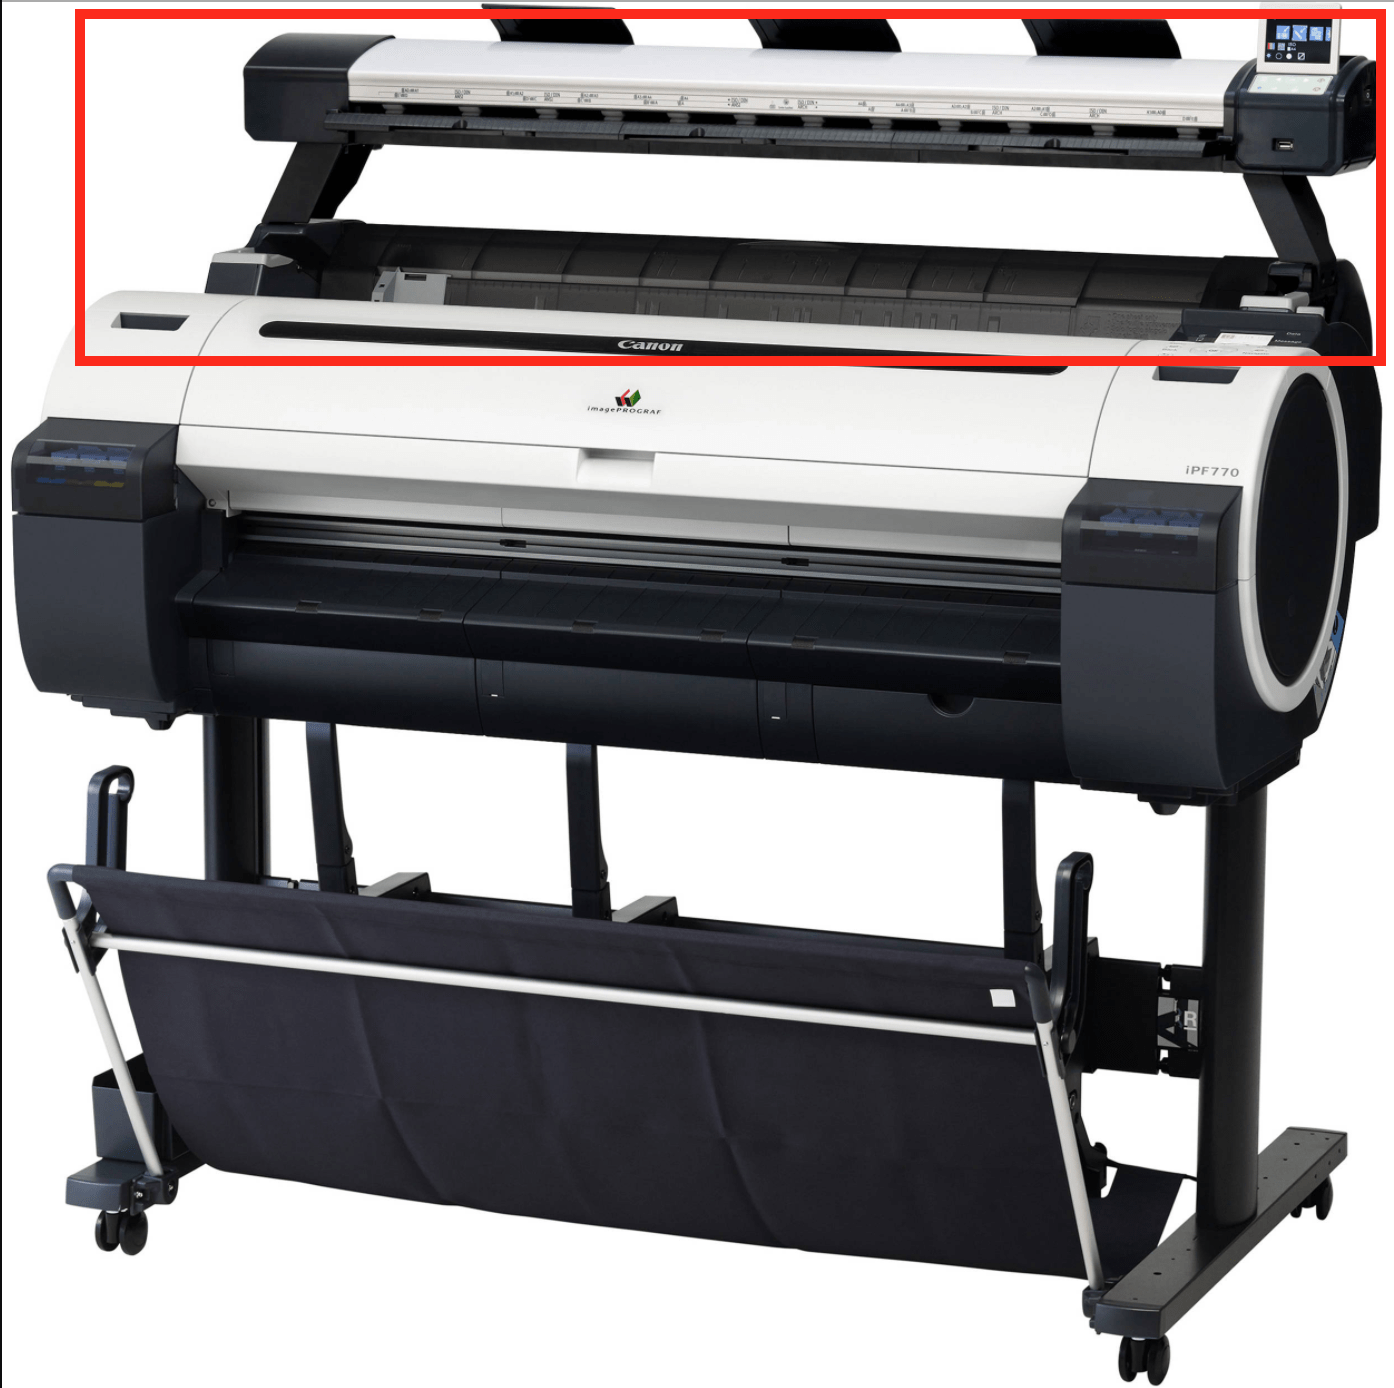 Absolute Toner 36" Scanner l24ei Used For Canon ImagePrograf IPF770 Wide Format Printer or as a sta Canon Scanner